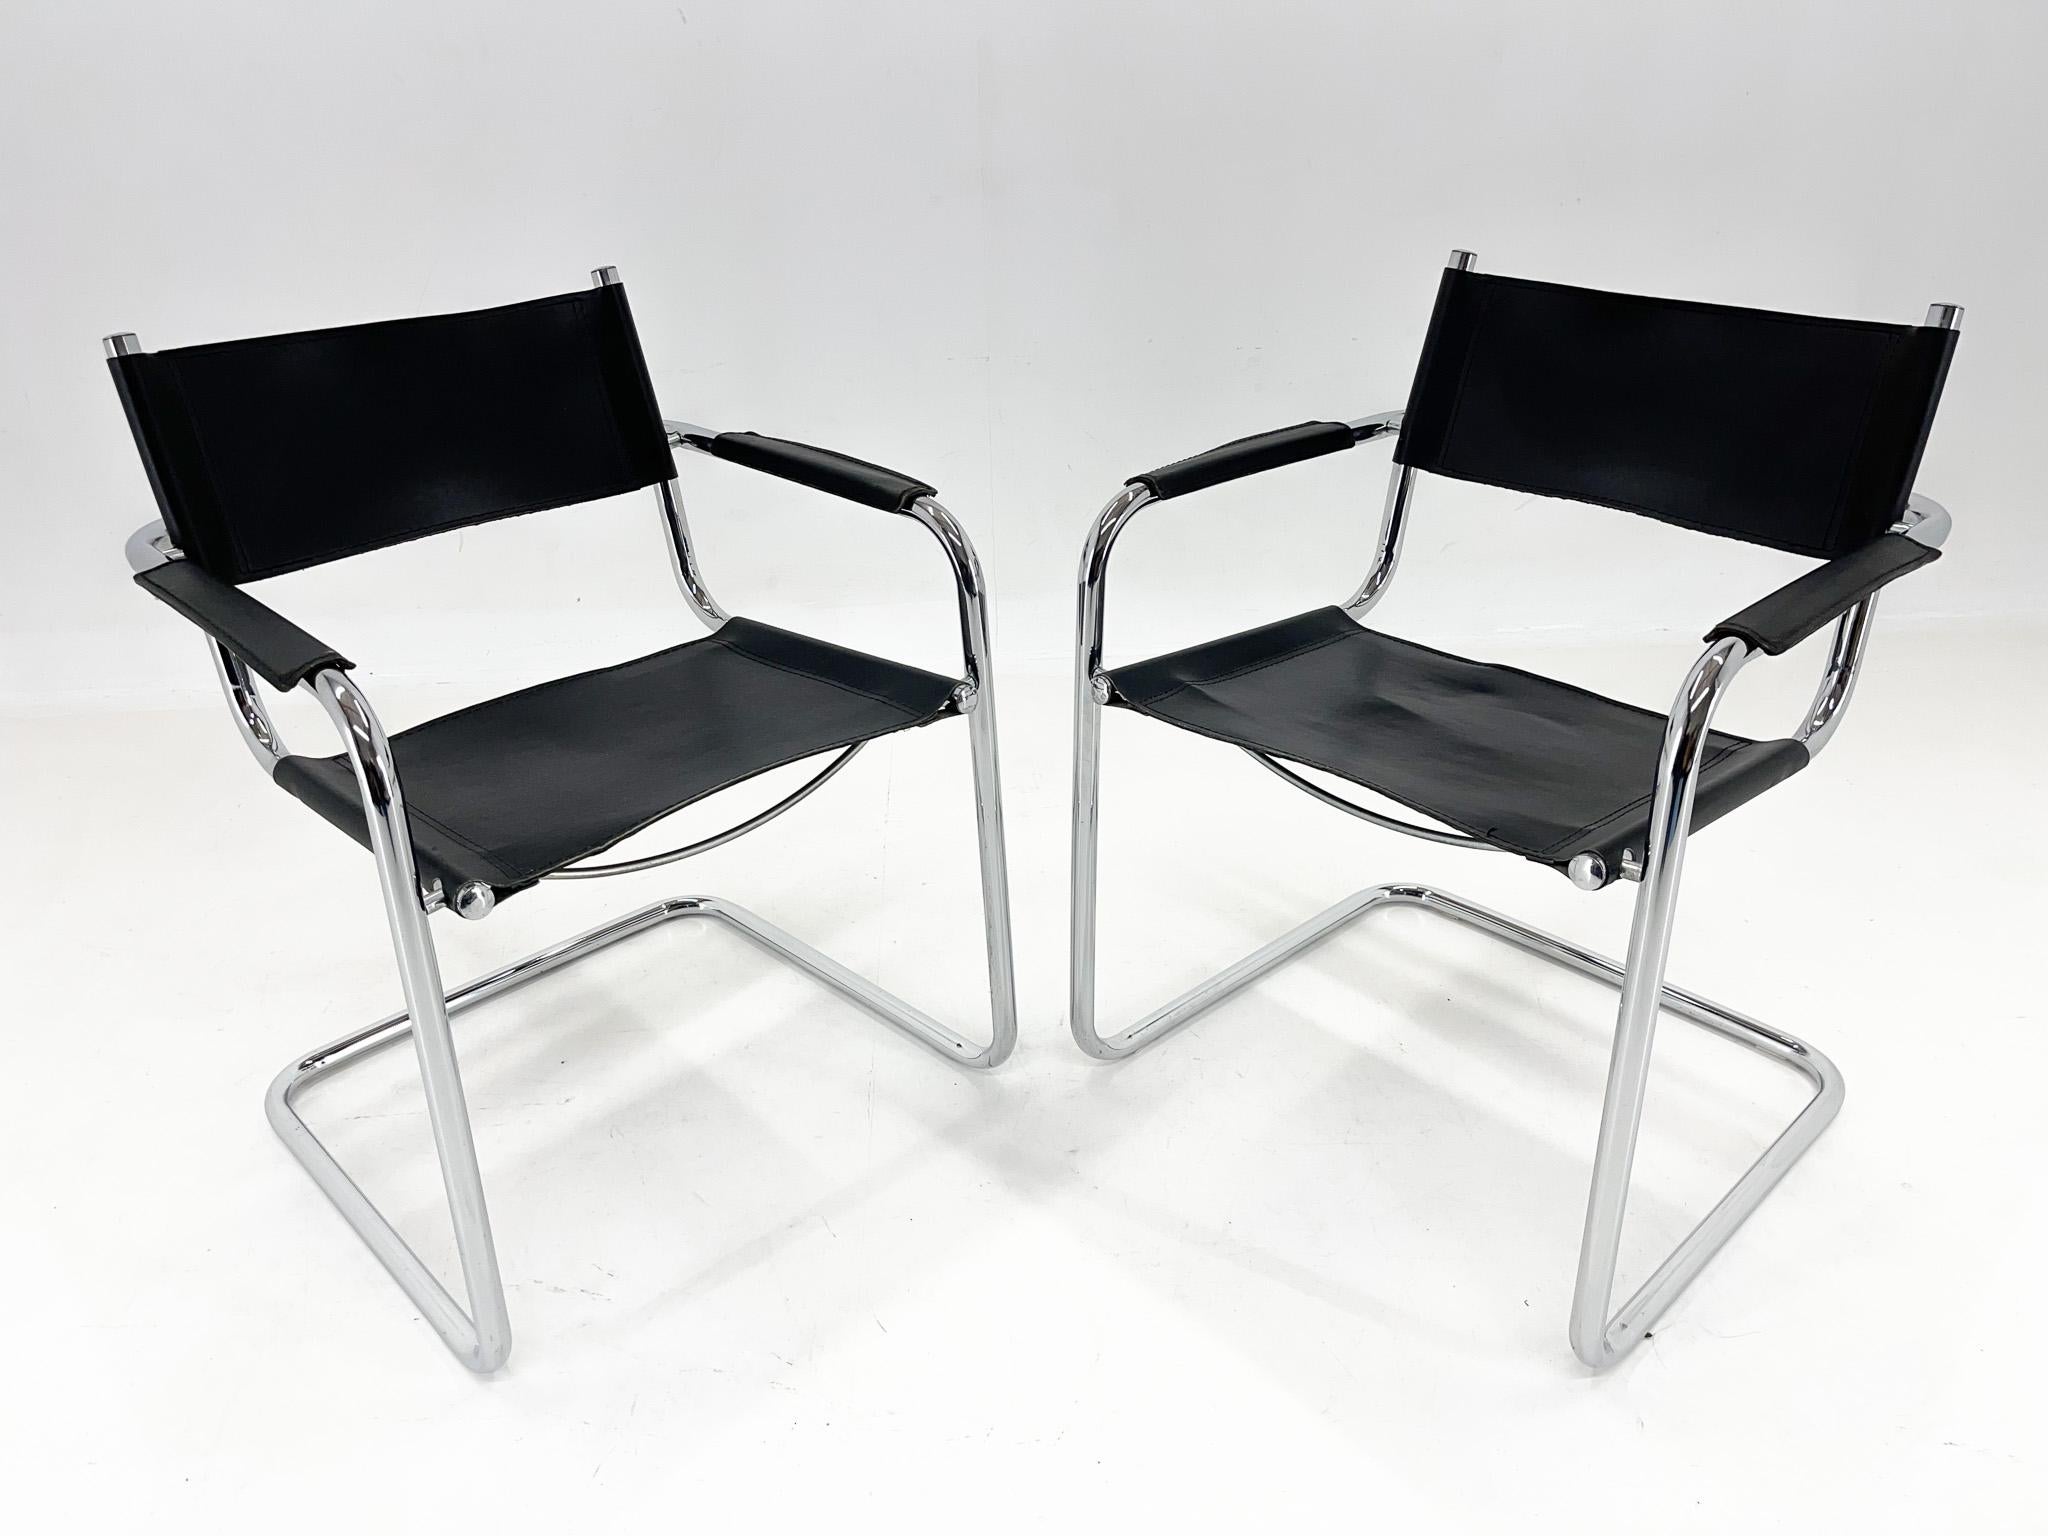 Two leather and chrome chairs by Mart Stam. The chrome is in very good condition. The leather has some sighns of use. All imperfections can be seen in the photos. Measure: seat is 47 cm high and the armrests are 63 cm high.